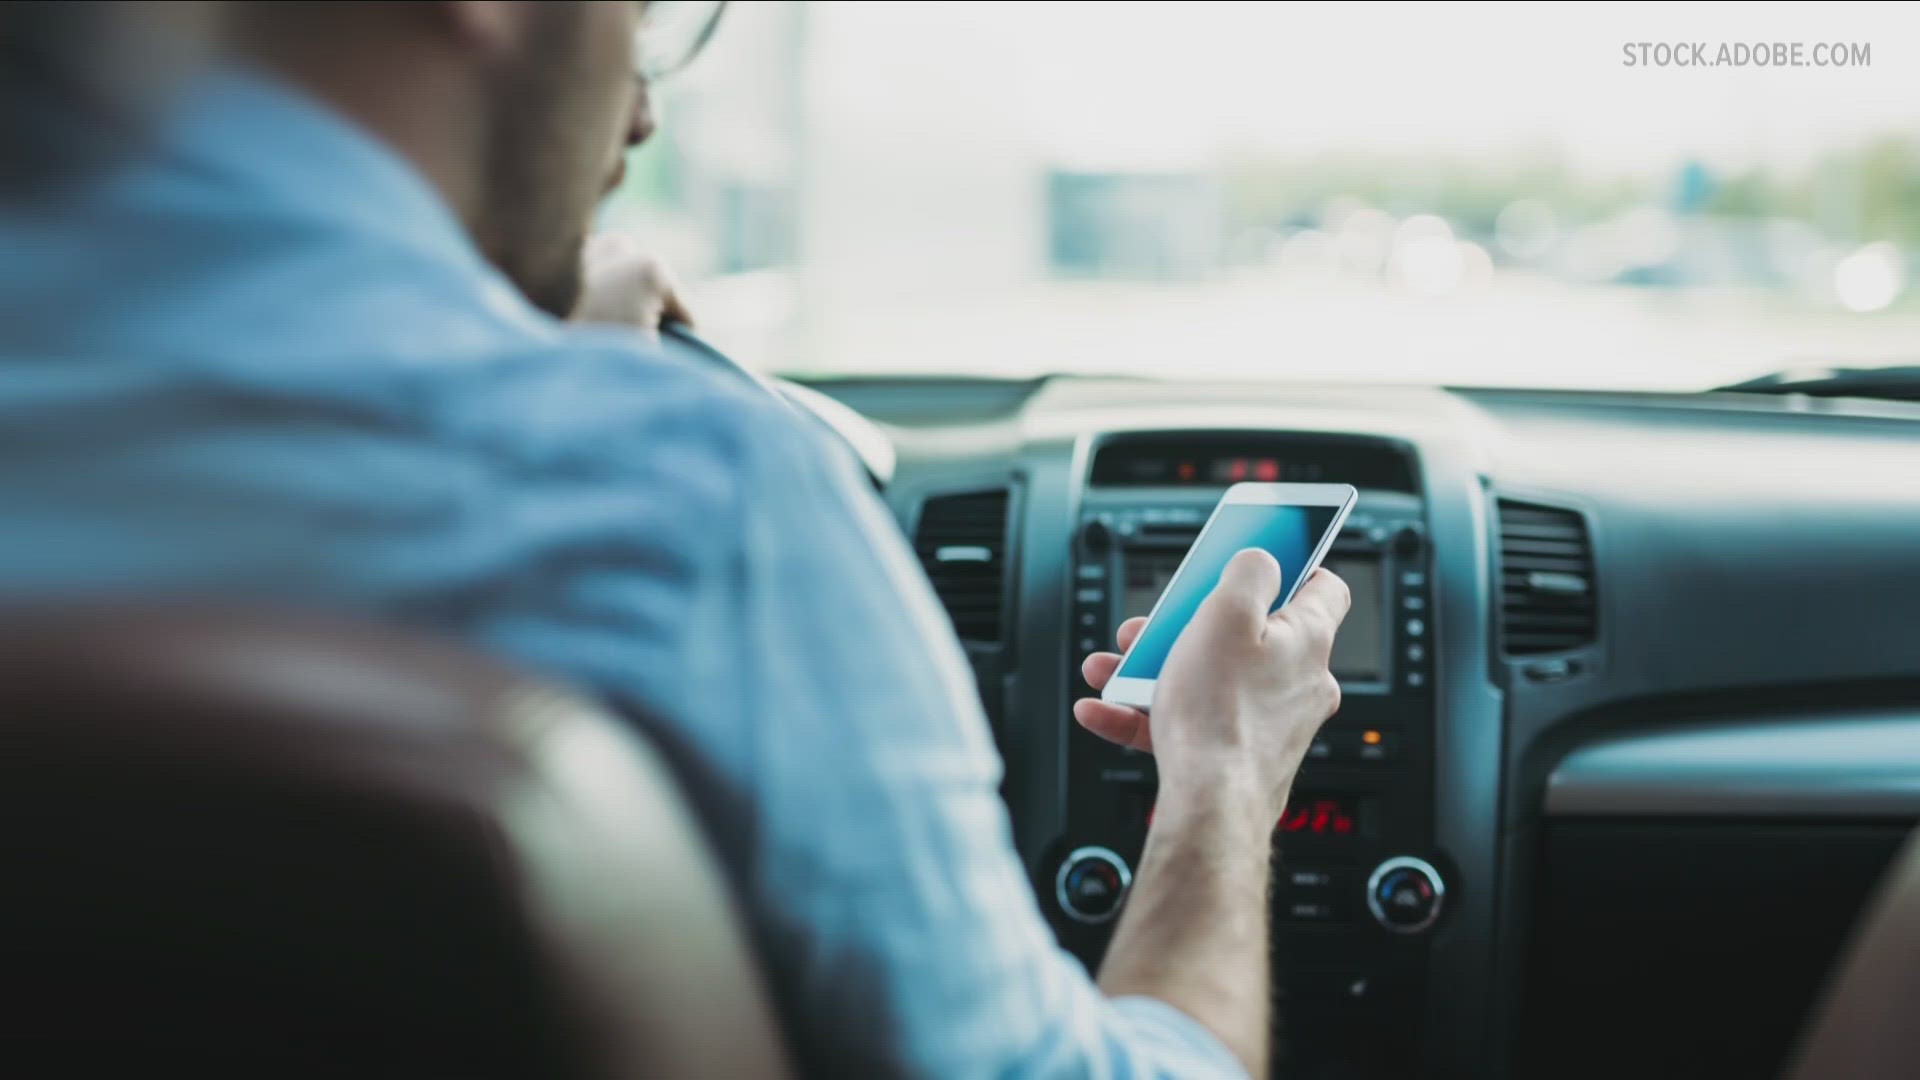 Penalties for talking on a cell phone or texting without using a hands-free system can range from 50 to 450-dollar fines up to five points on your license.